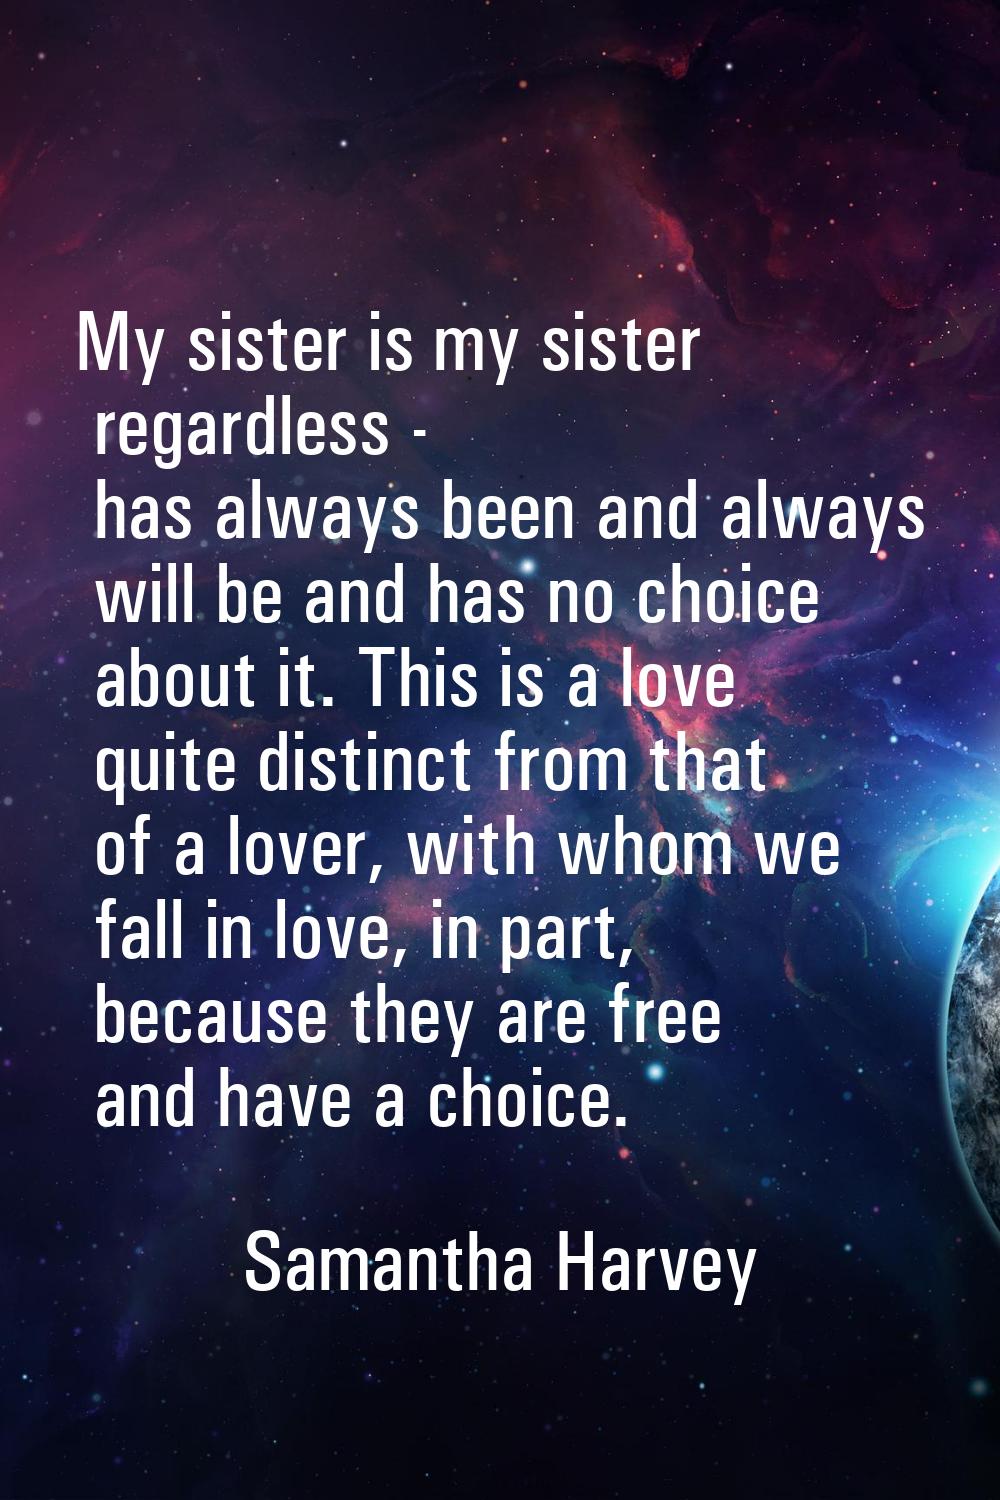 My sister is my sister regardless - has always been and always will be and has no choice about it. 